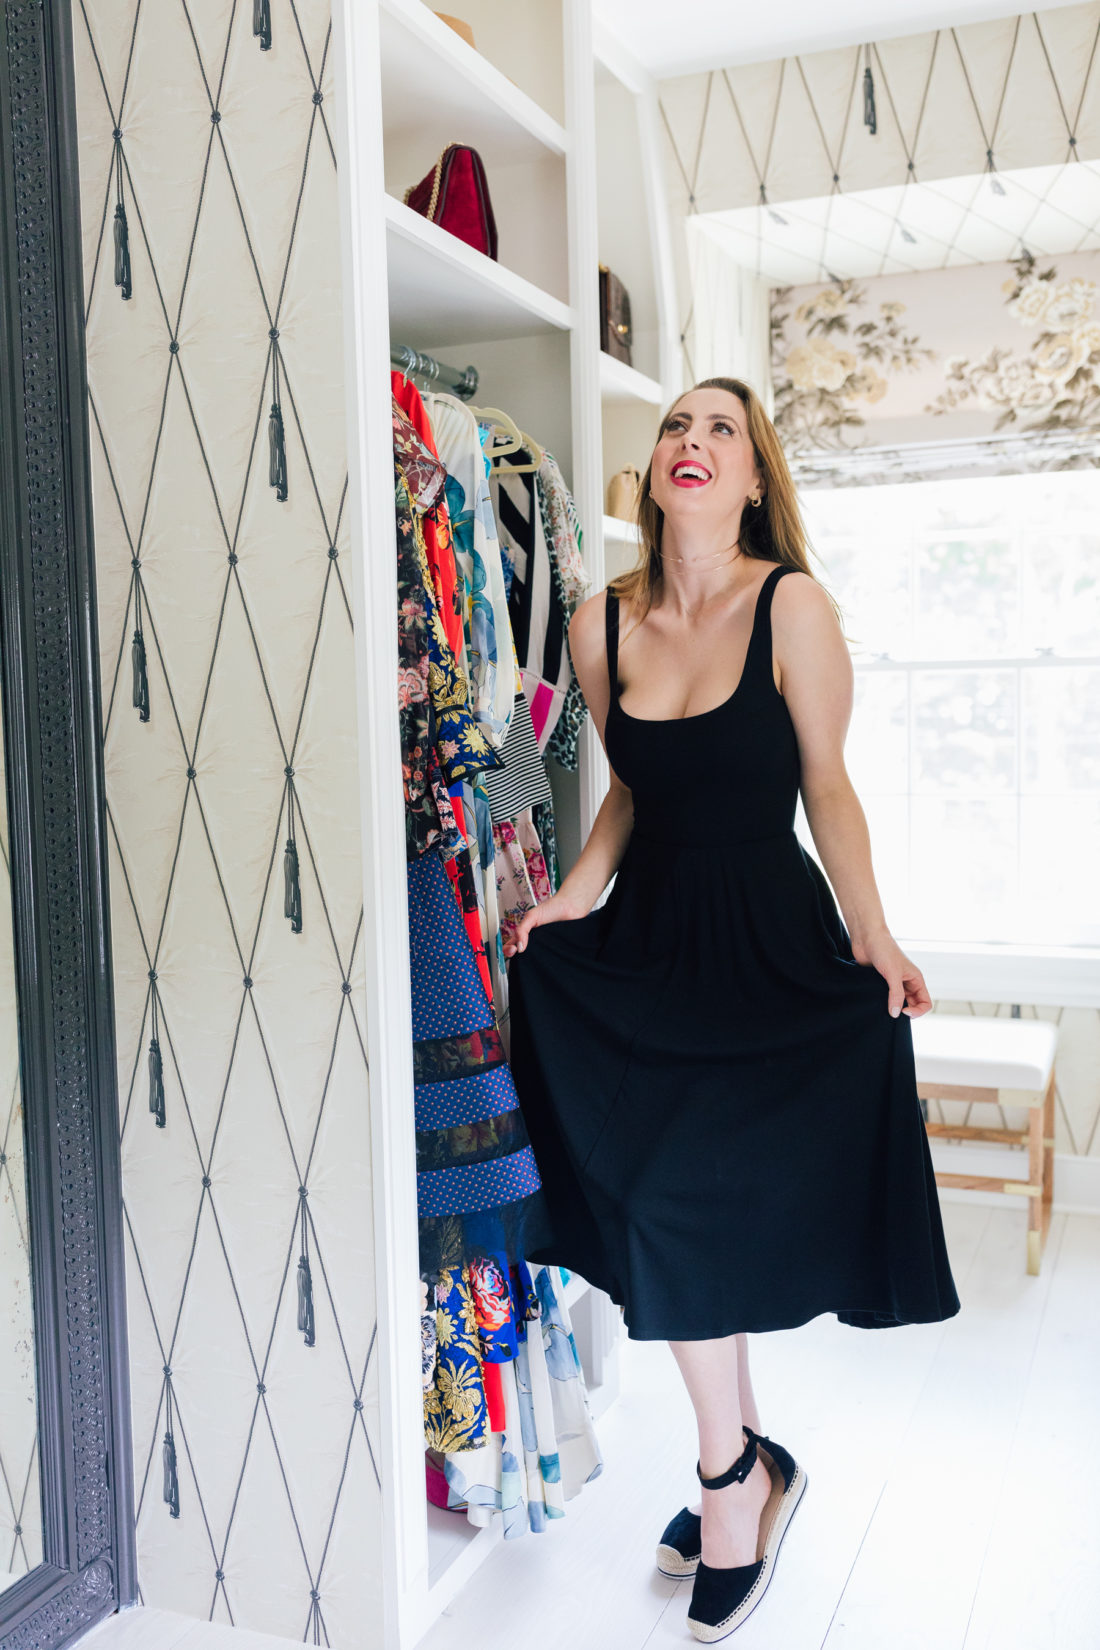 Eva Amurri Martino tries on outfits for her family trip to Italy